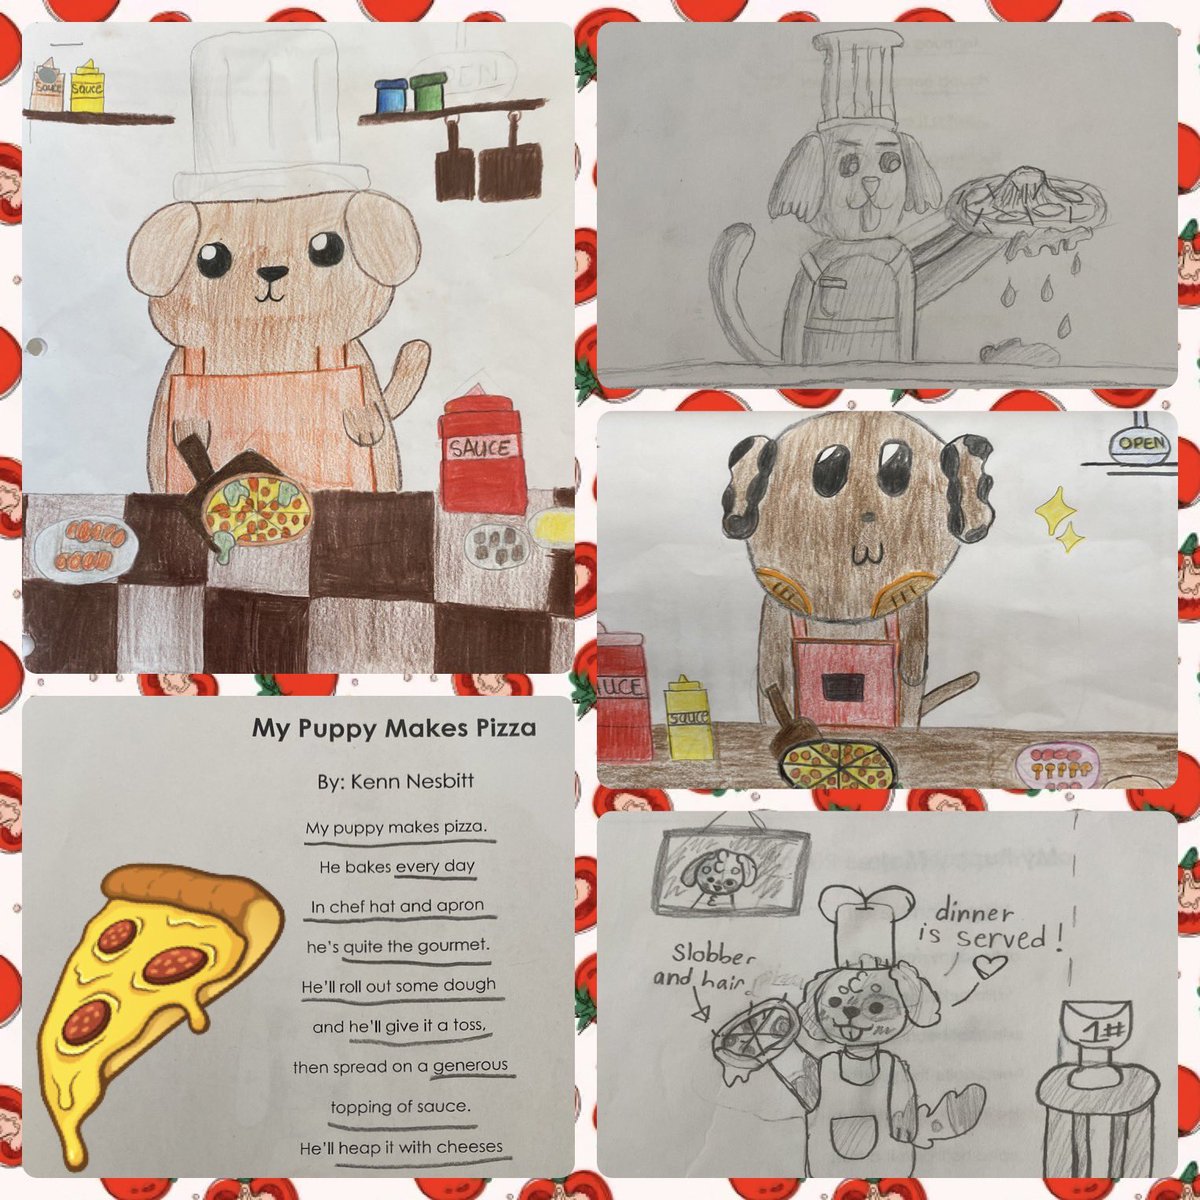 “My puppy makes pizza / He bakes every day / In chef hat and apron / He’s quite the gourmet” (My Puppy Makes Pizza by Kenn Nesbitt). A fun visualization activity as part of our poetry unit @LeMarchantElem. 🐶🍕